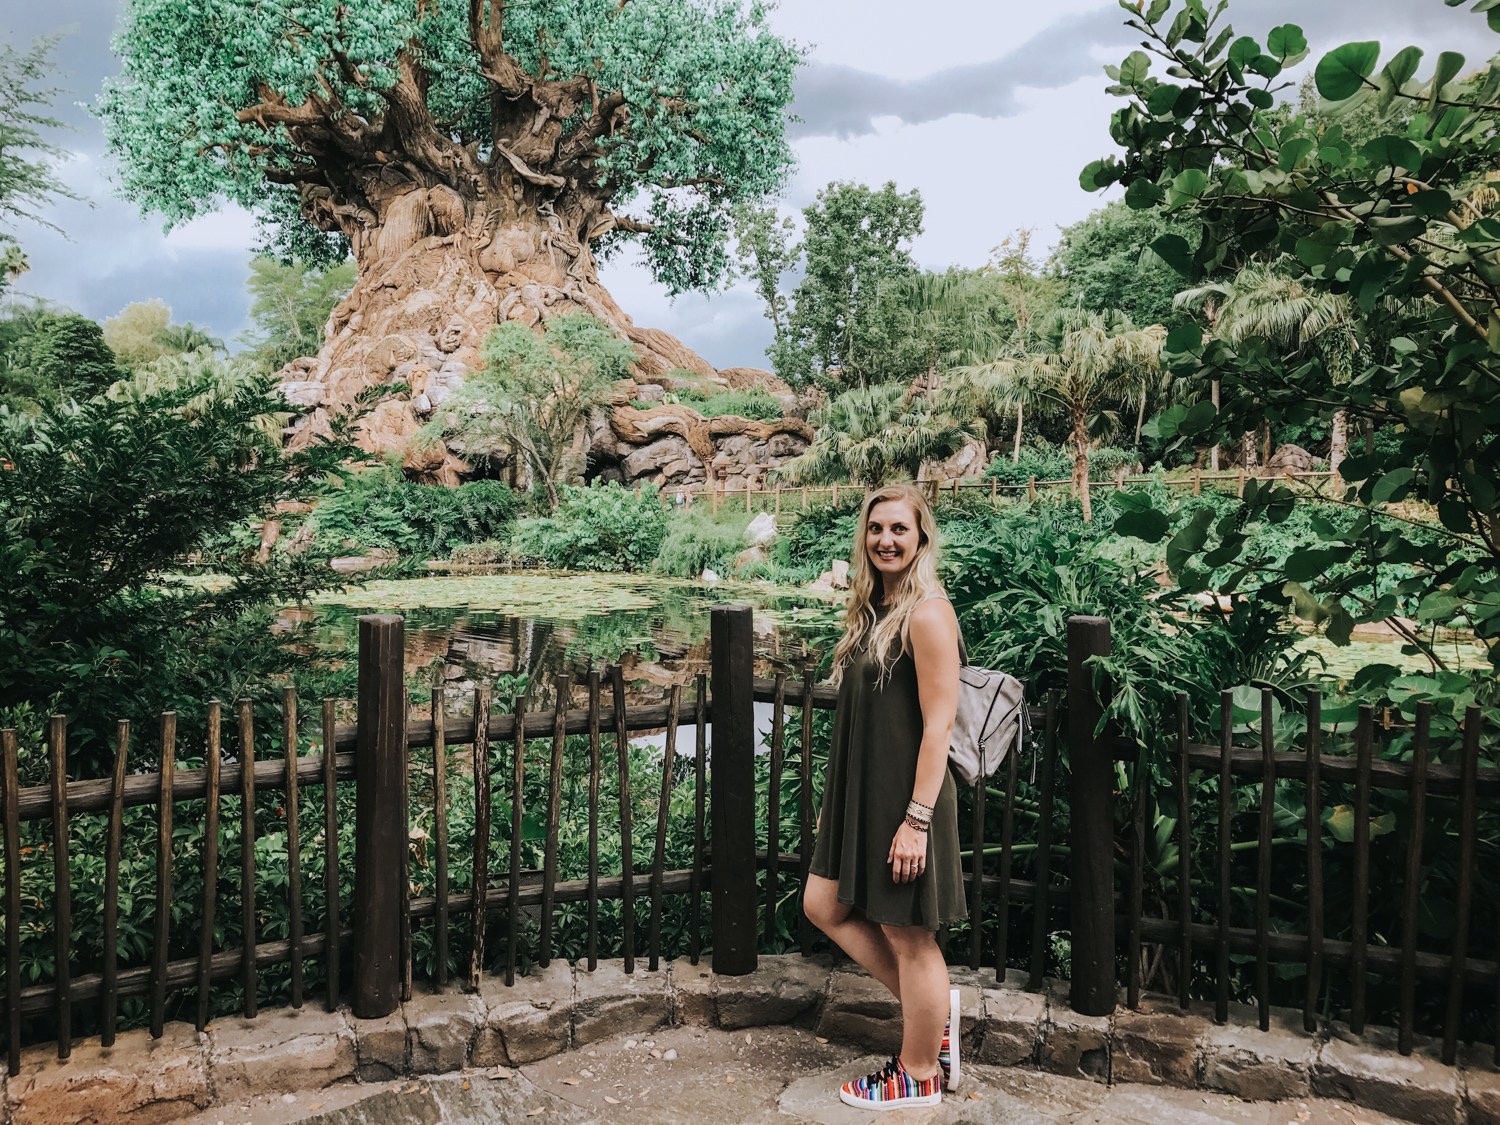 At Animal Kingdom's Tree of Life wearing an olive shift dress, ISKAY colorful handmade shoes, @kutukakiss bracelets, and @violetrayny backpack.